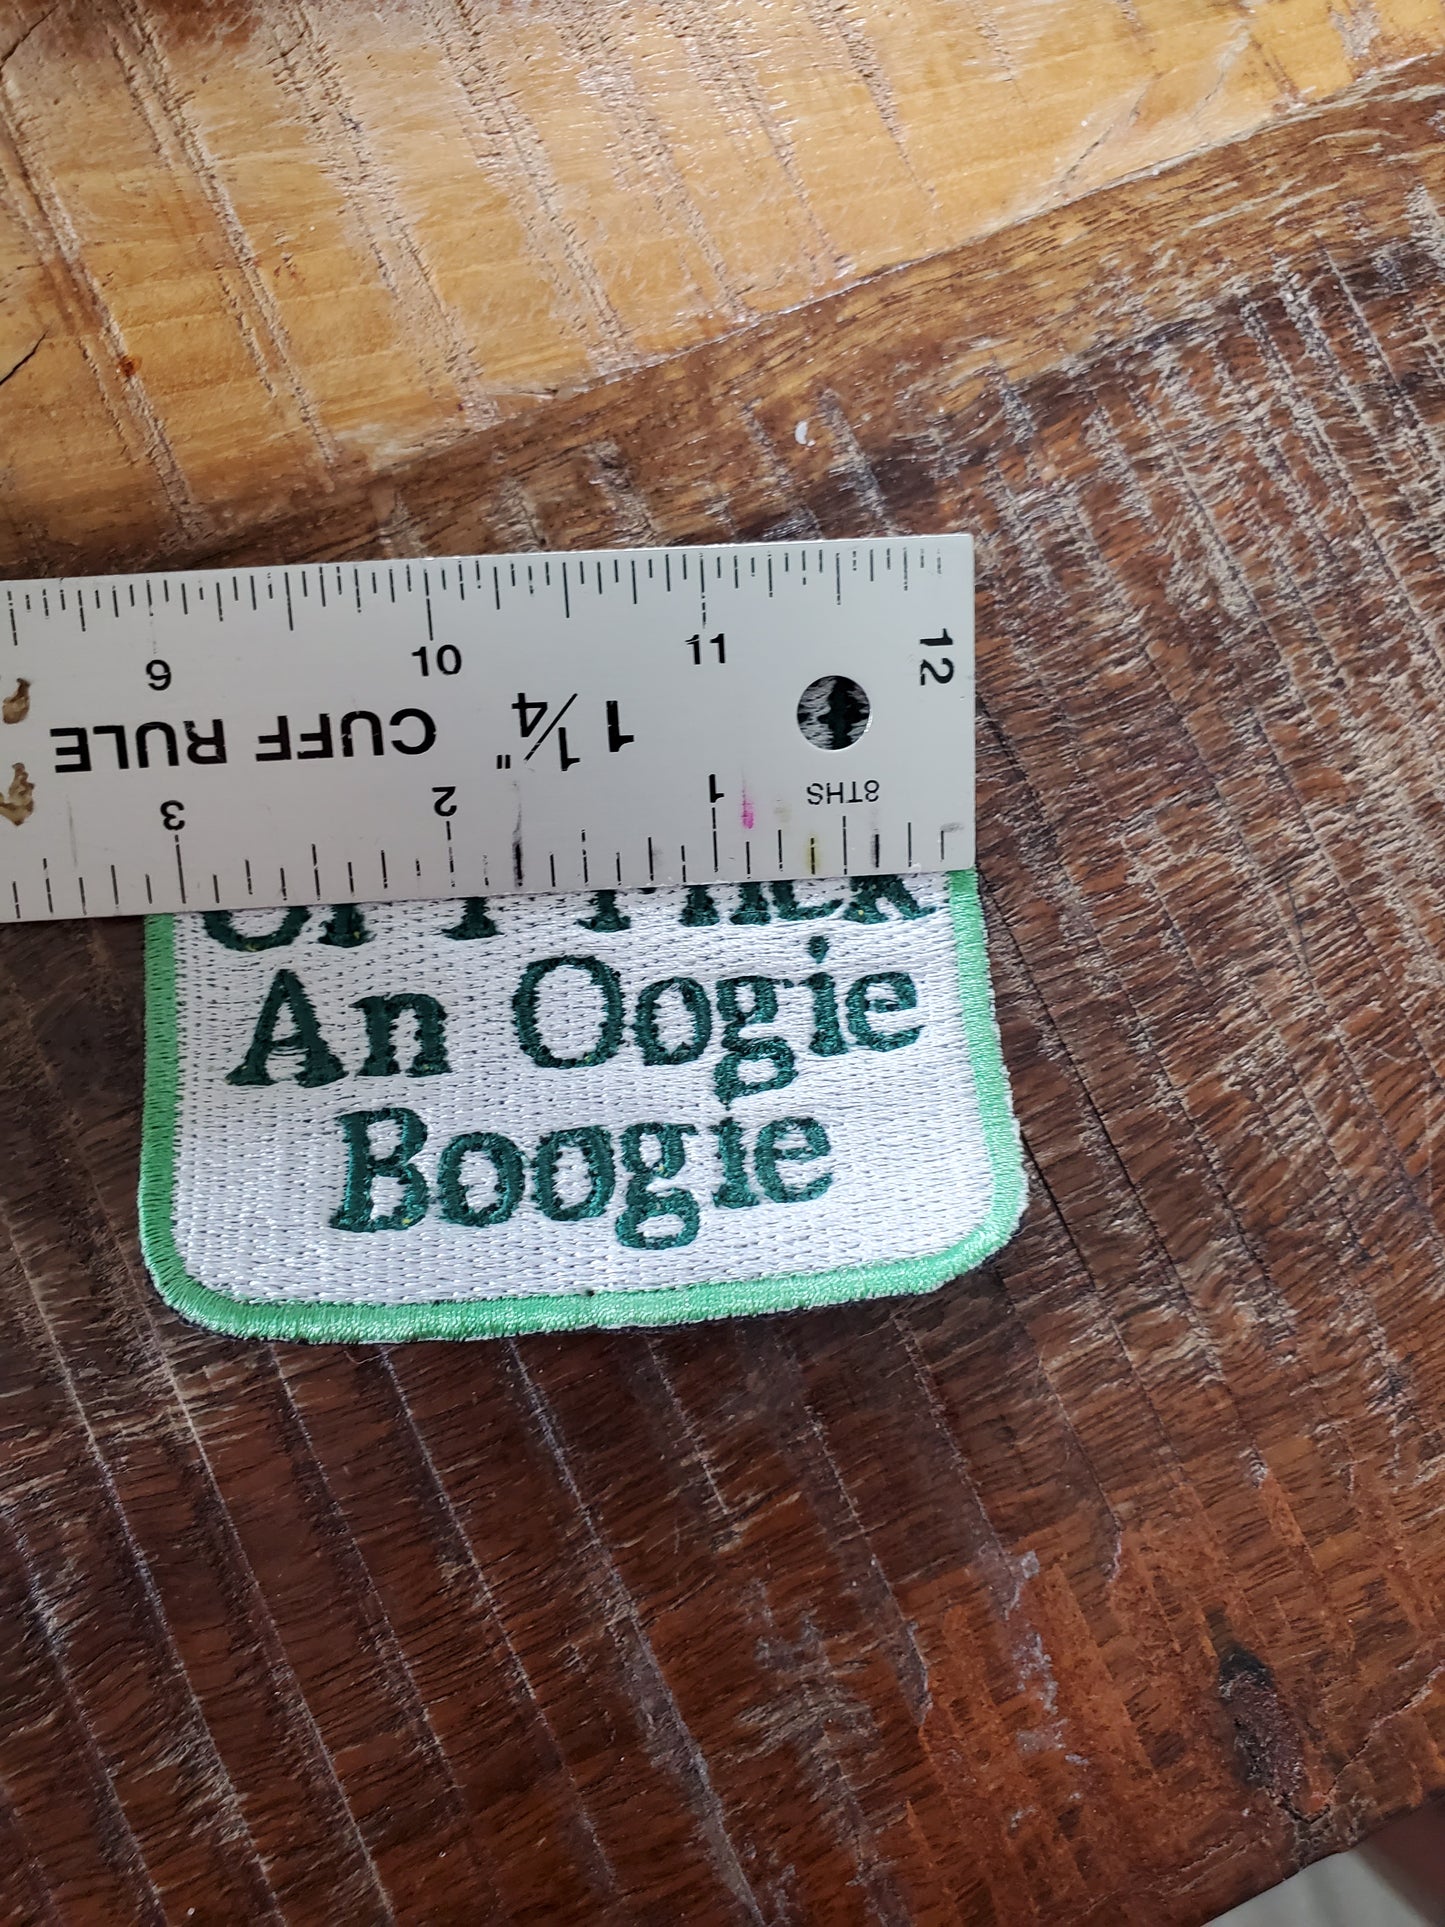 Back Off Or I Flick An Oogie Boogie Sew On Patch